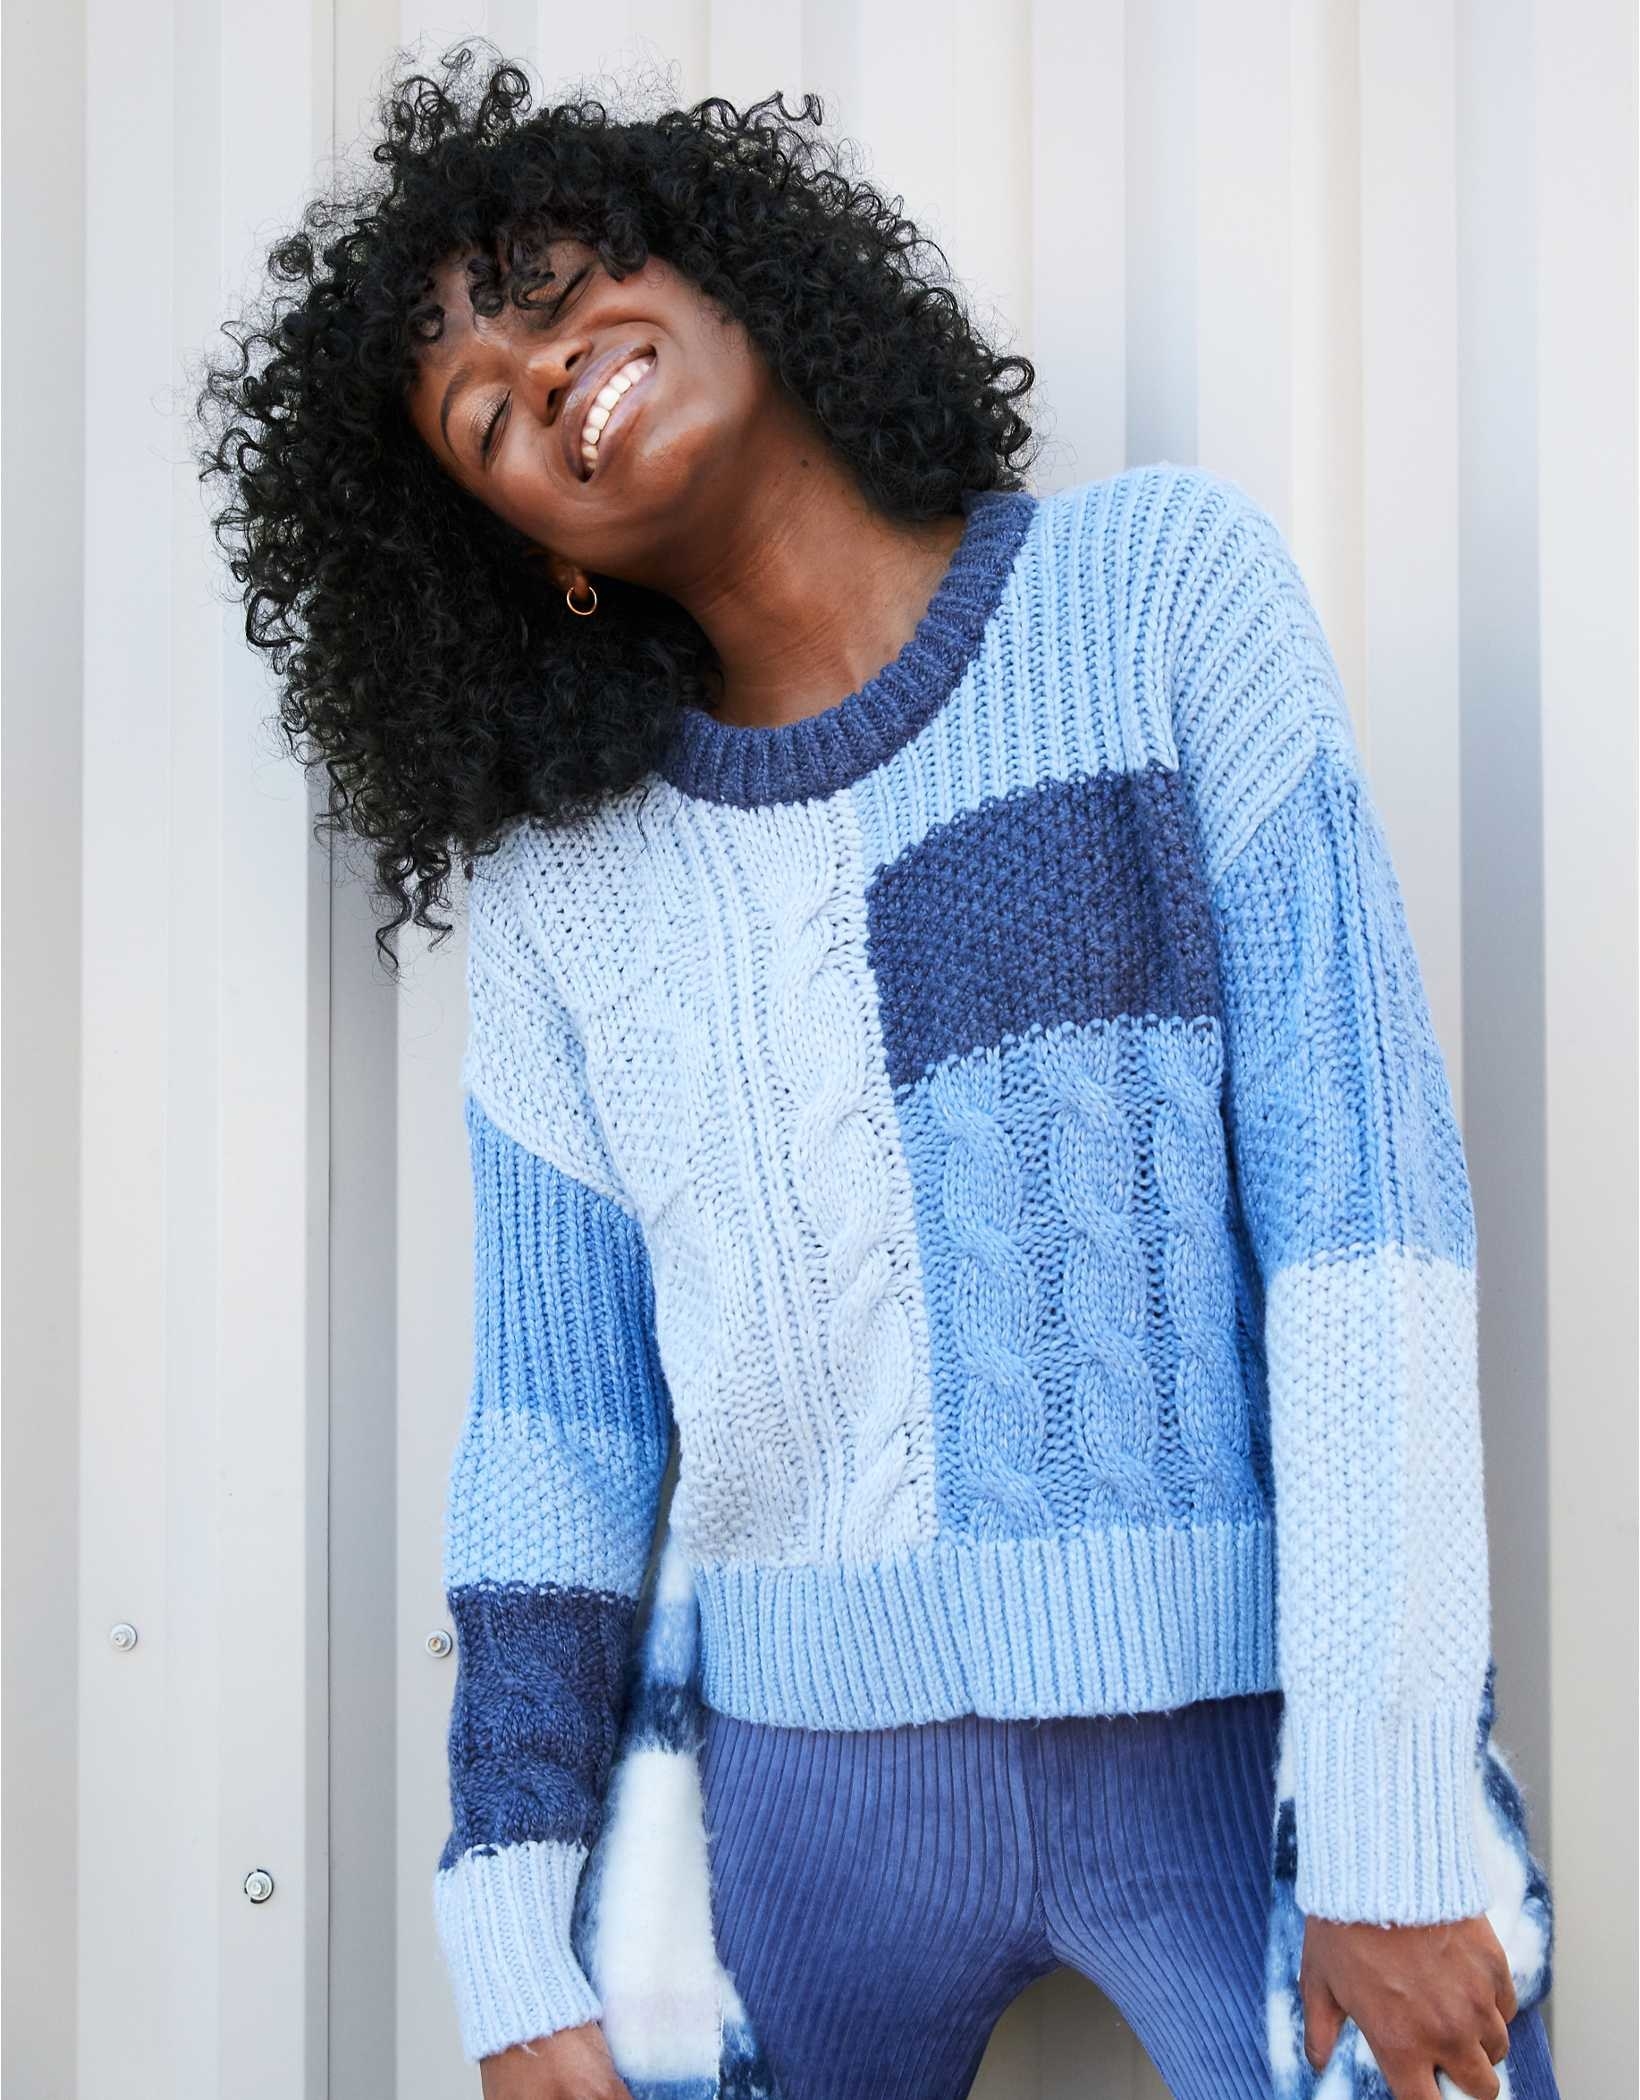 model wearing the blue patchwork knitted sweater